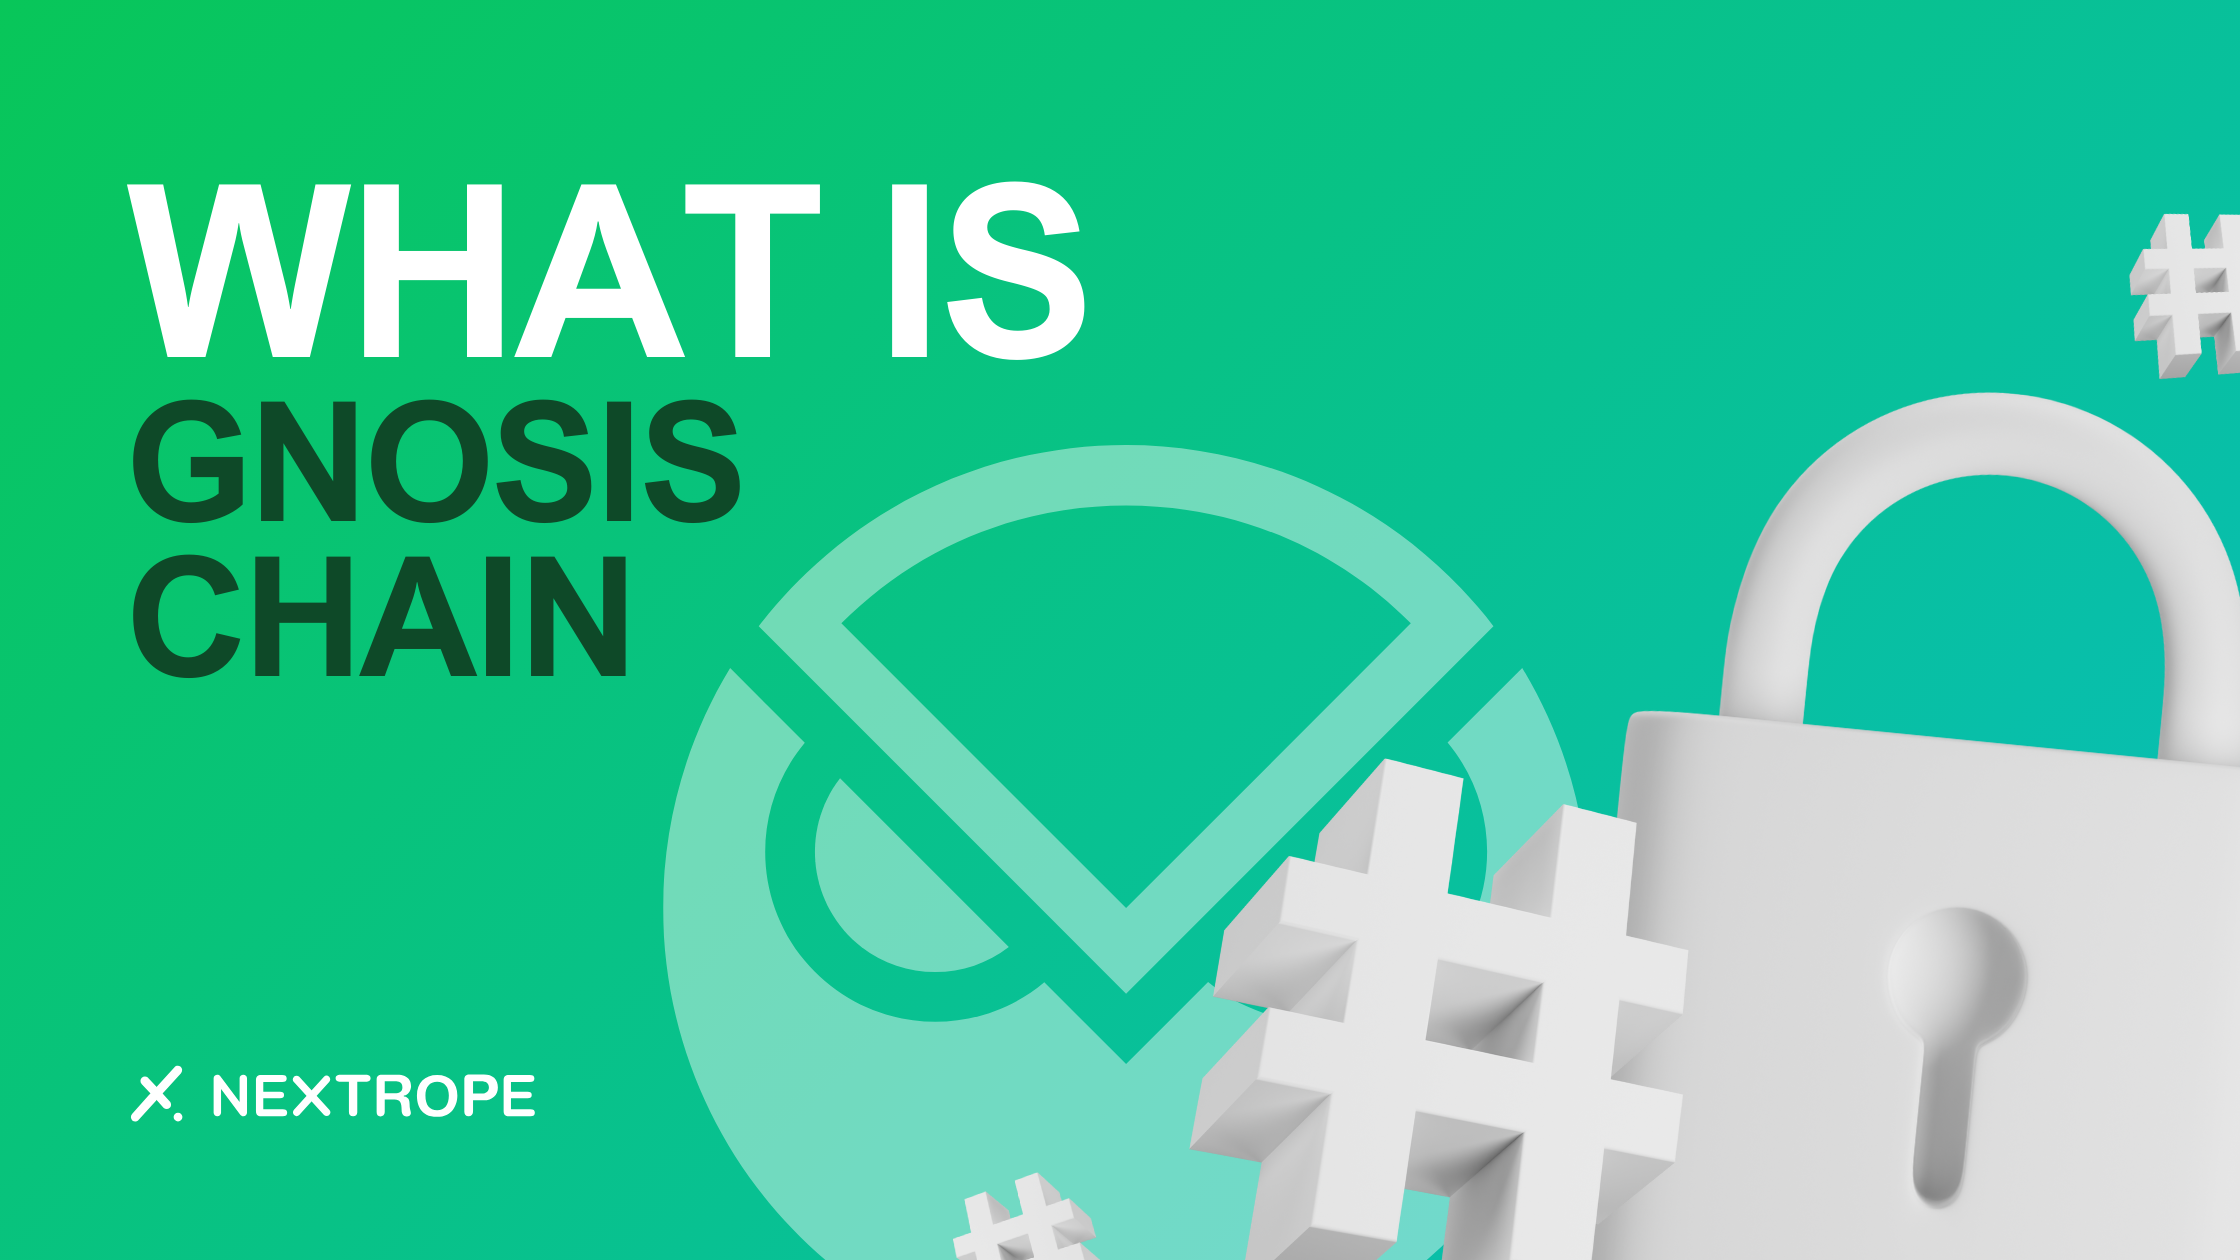 What is Gnosis Chain?